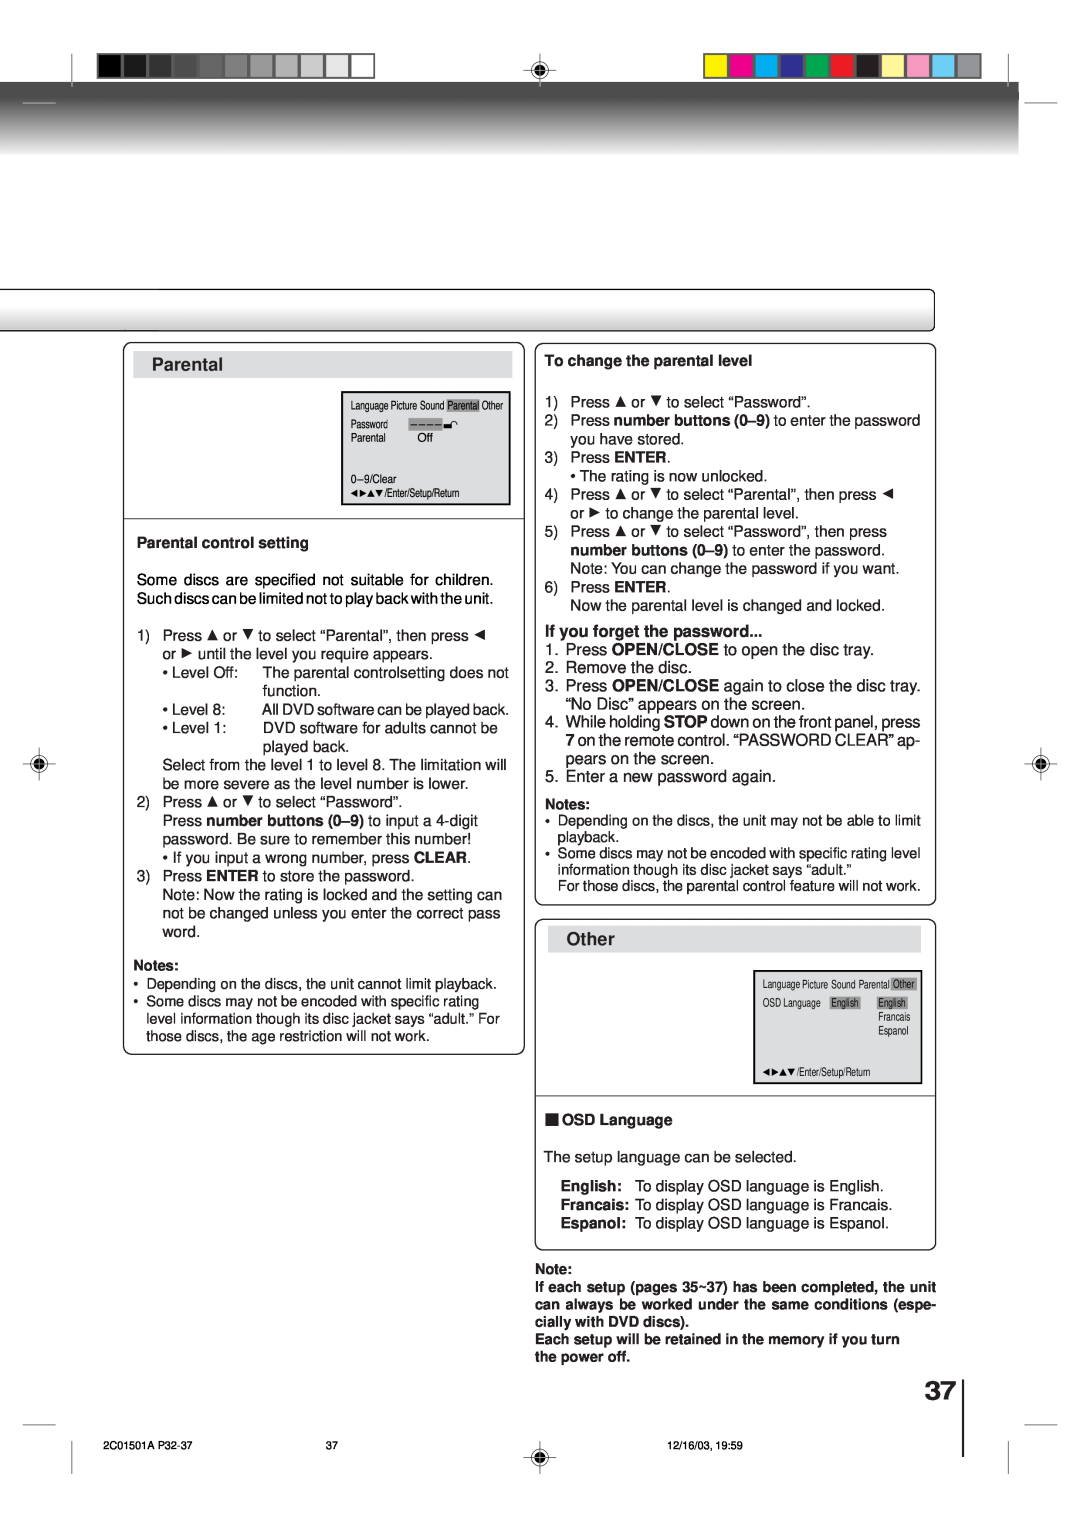 Toshiba SD-K740SU owner manual Other, Parental control setting, To change the parental level, OSD Language 